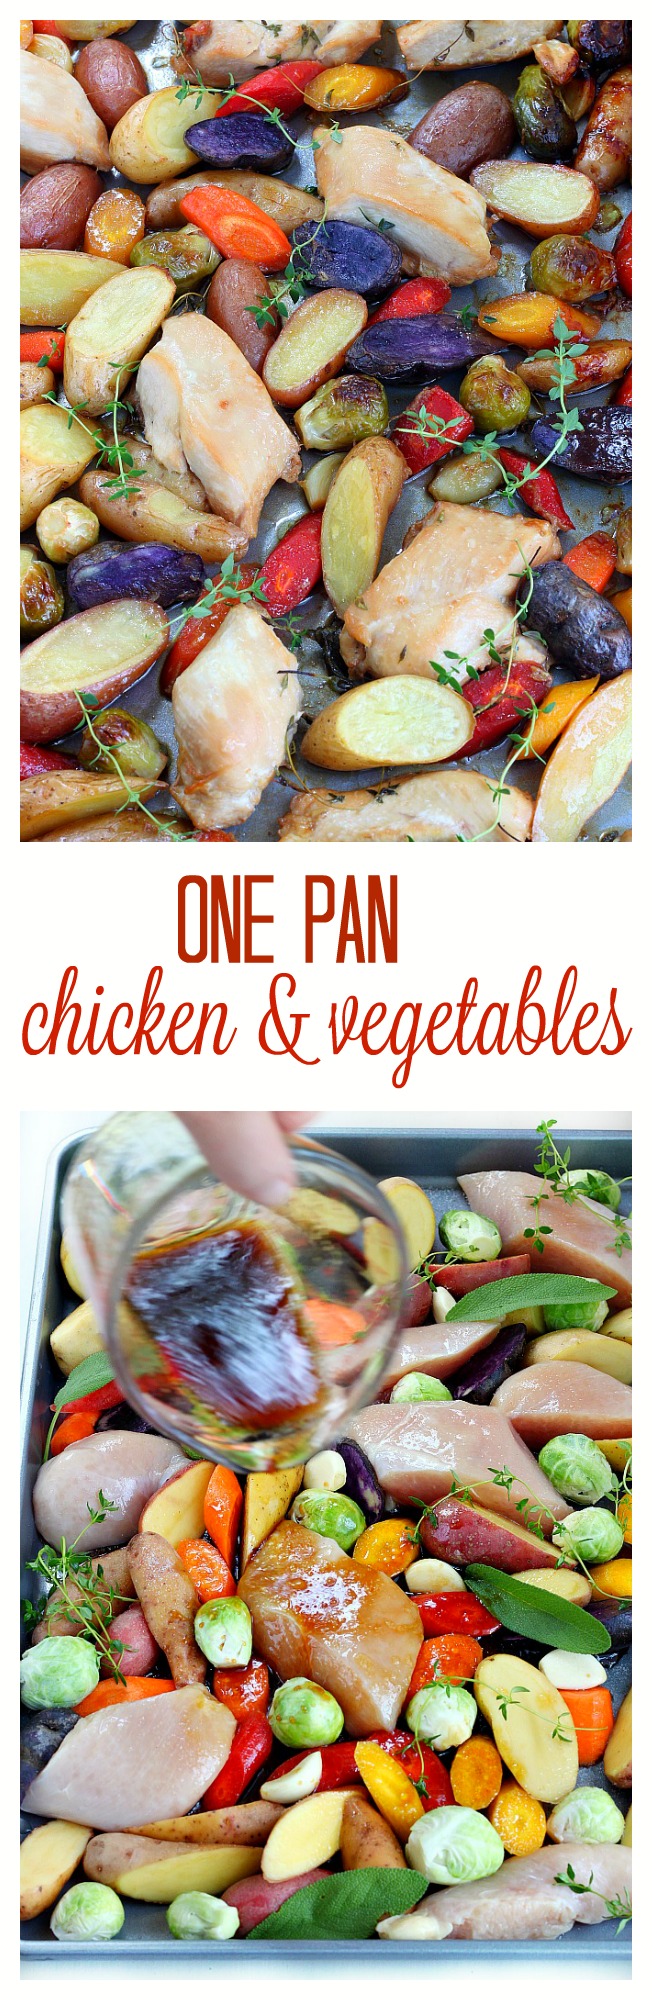 Tender chicken baked with a rainbow of vegetables - potatoes, carrots and Brussels sprouts in one single pan! Only 10 minutes of prep time to make this roasted chicken and vegetables dinner! 